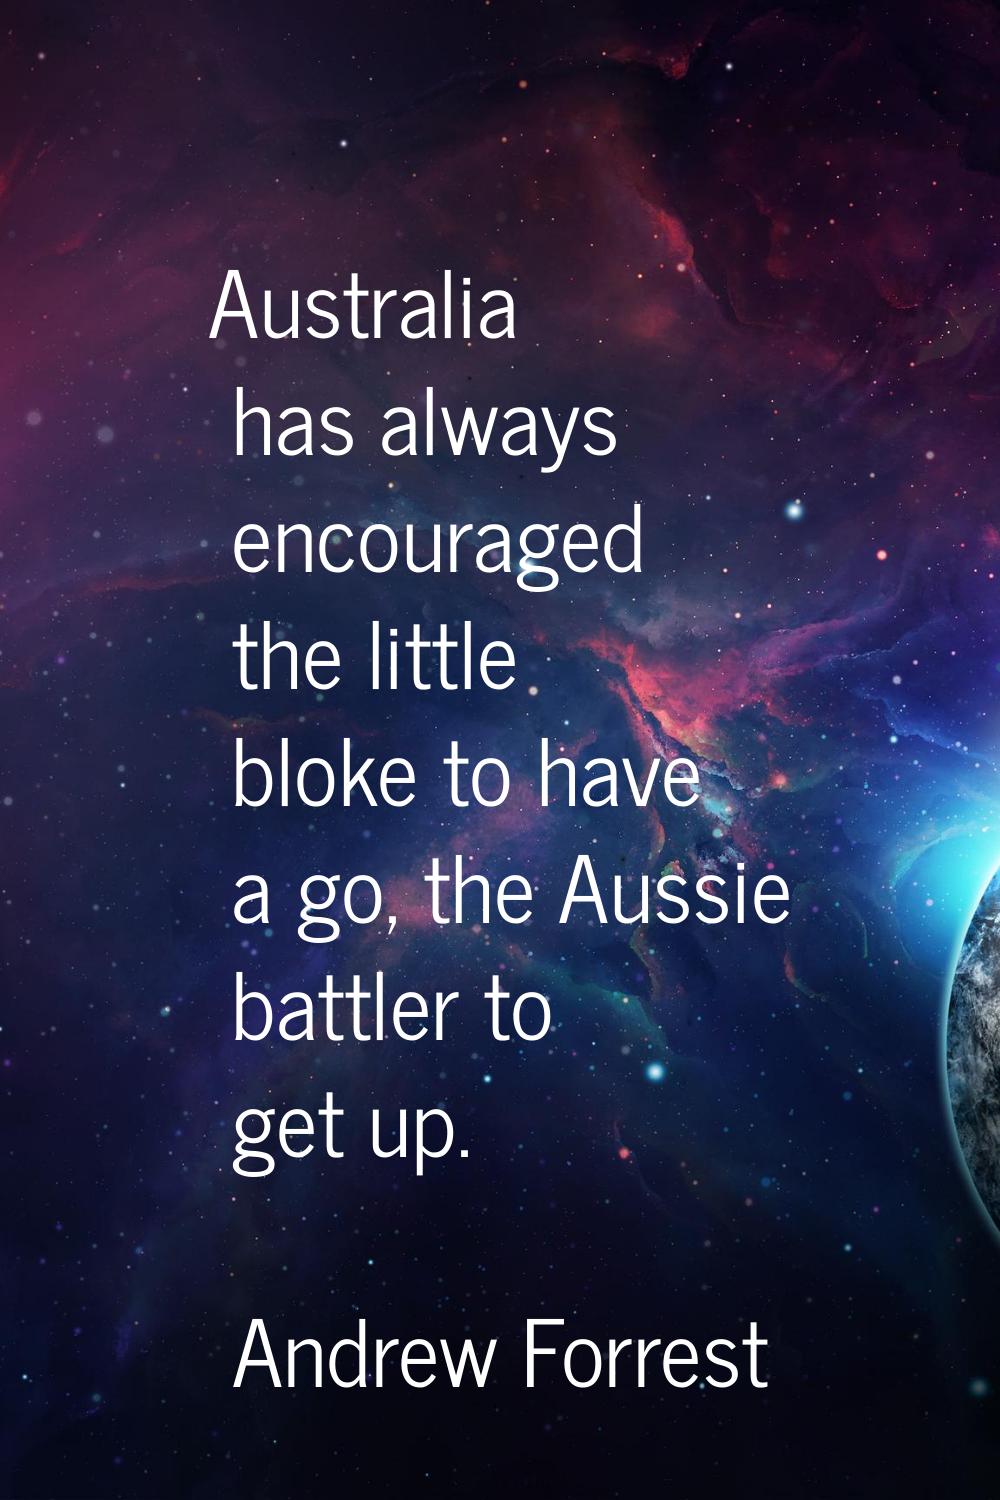 Australia has always encouraged the little bloke to have a go, the Aussie battler to get up.